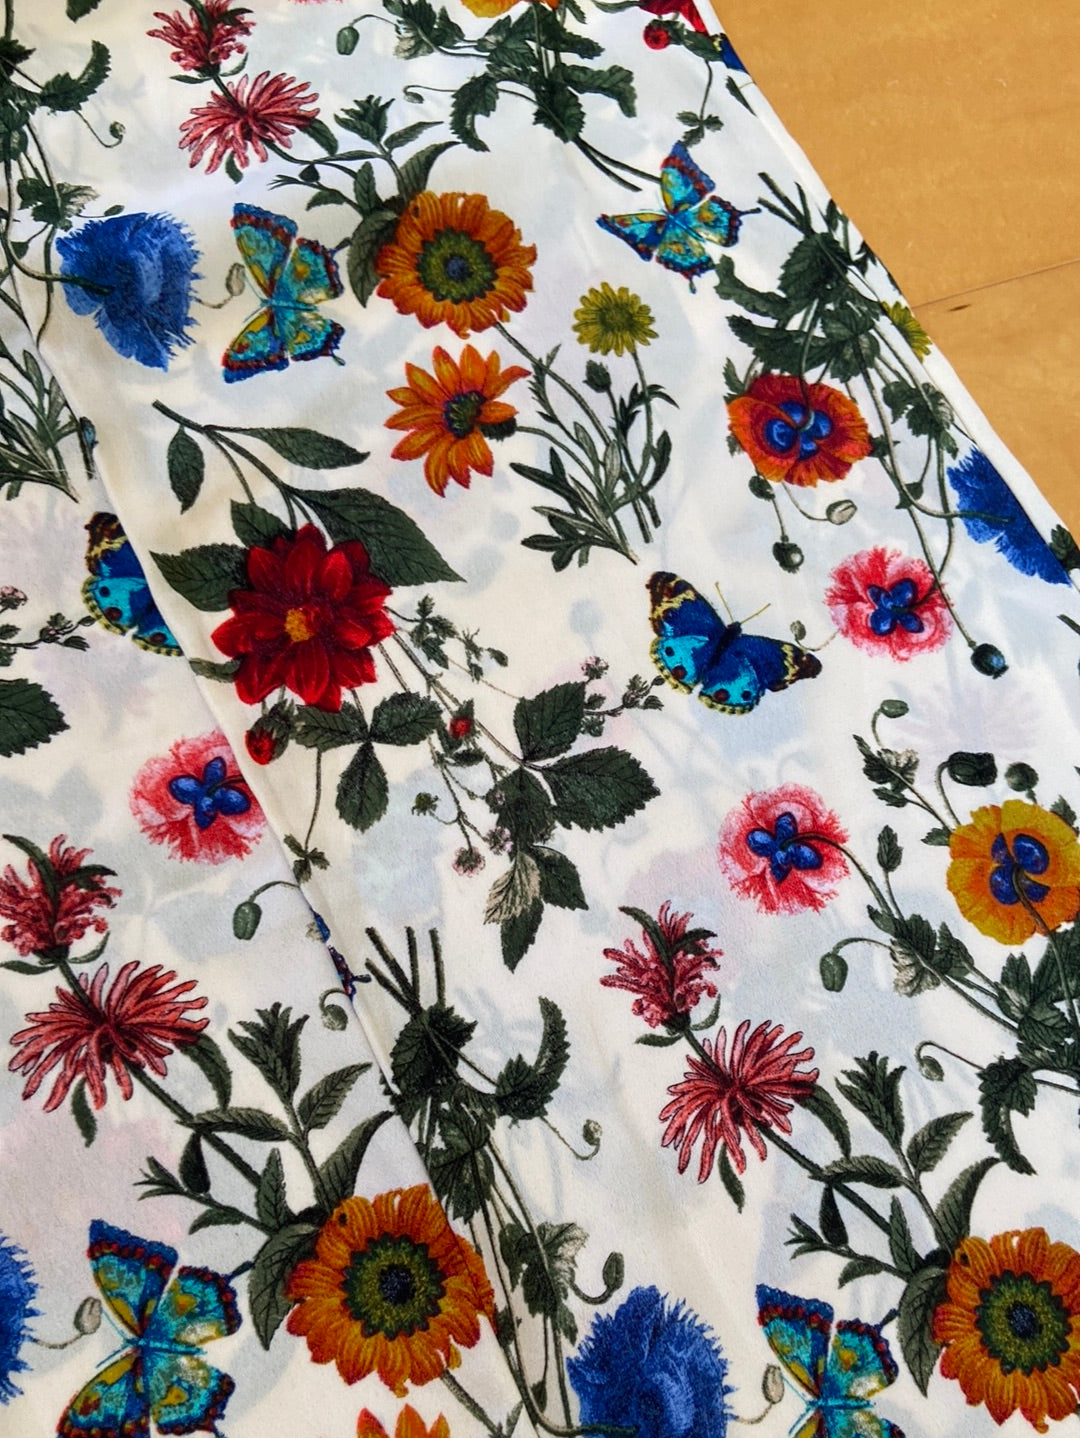 FLORAL FROCK Joompy Size M